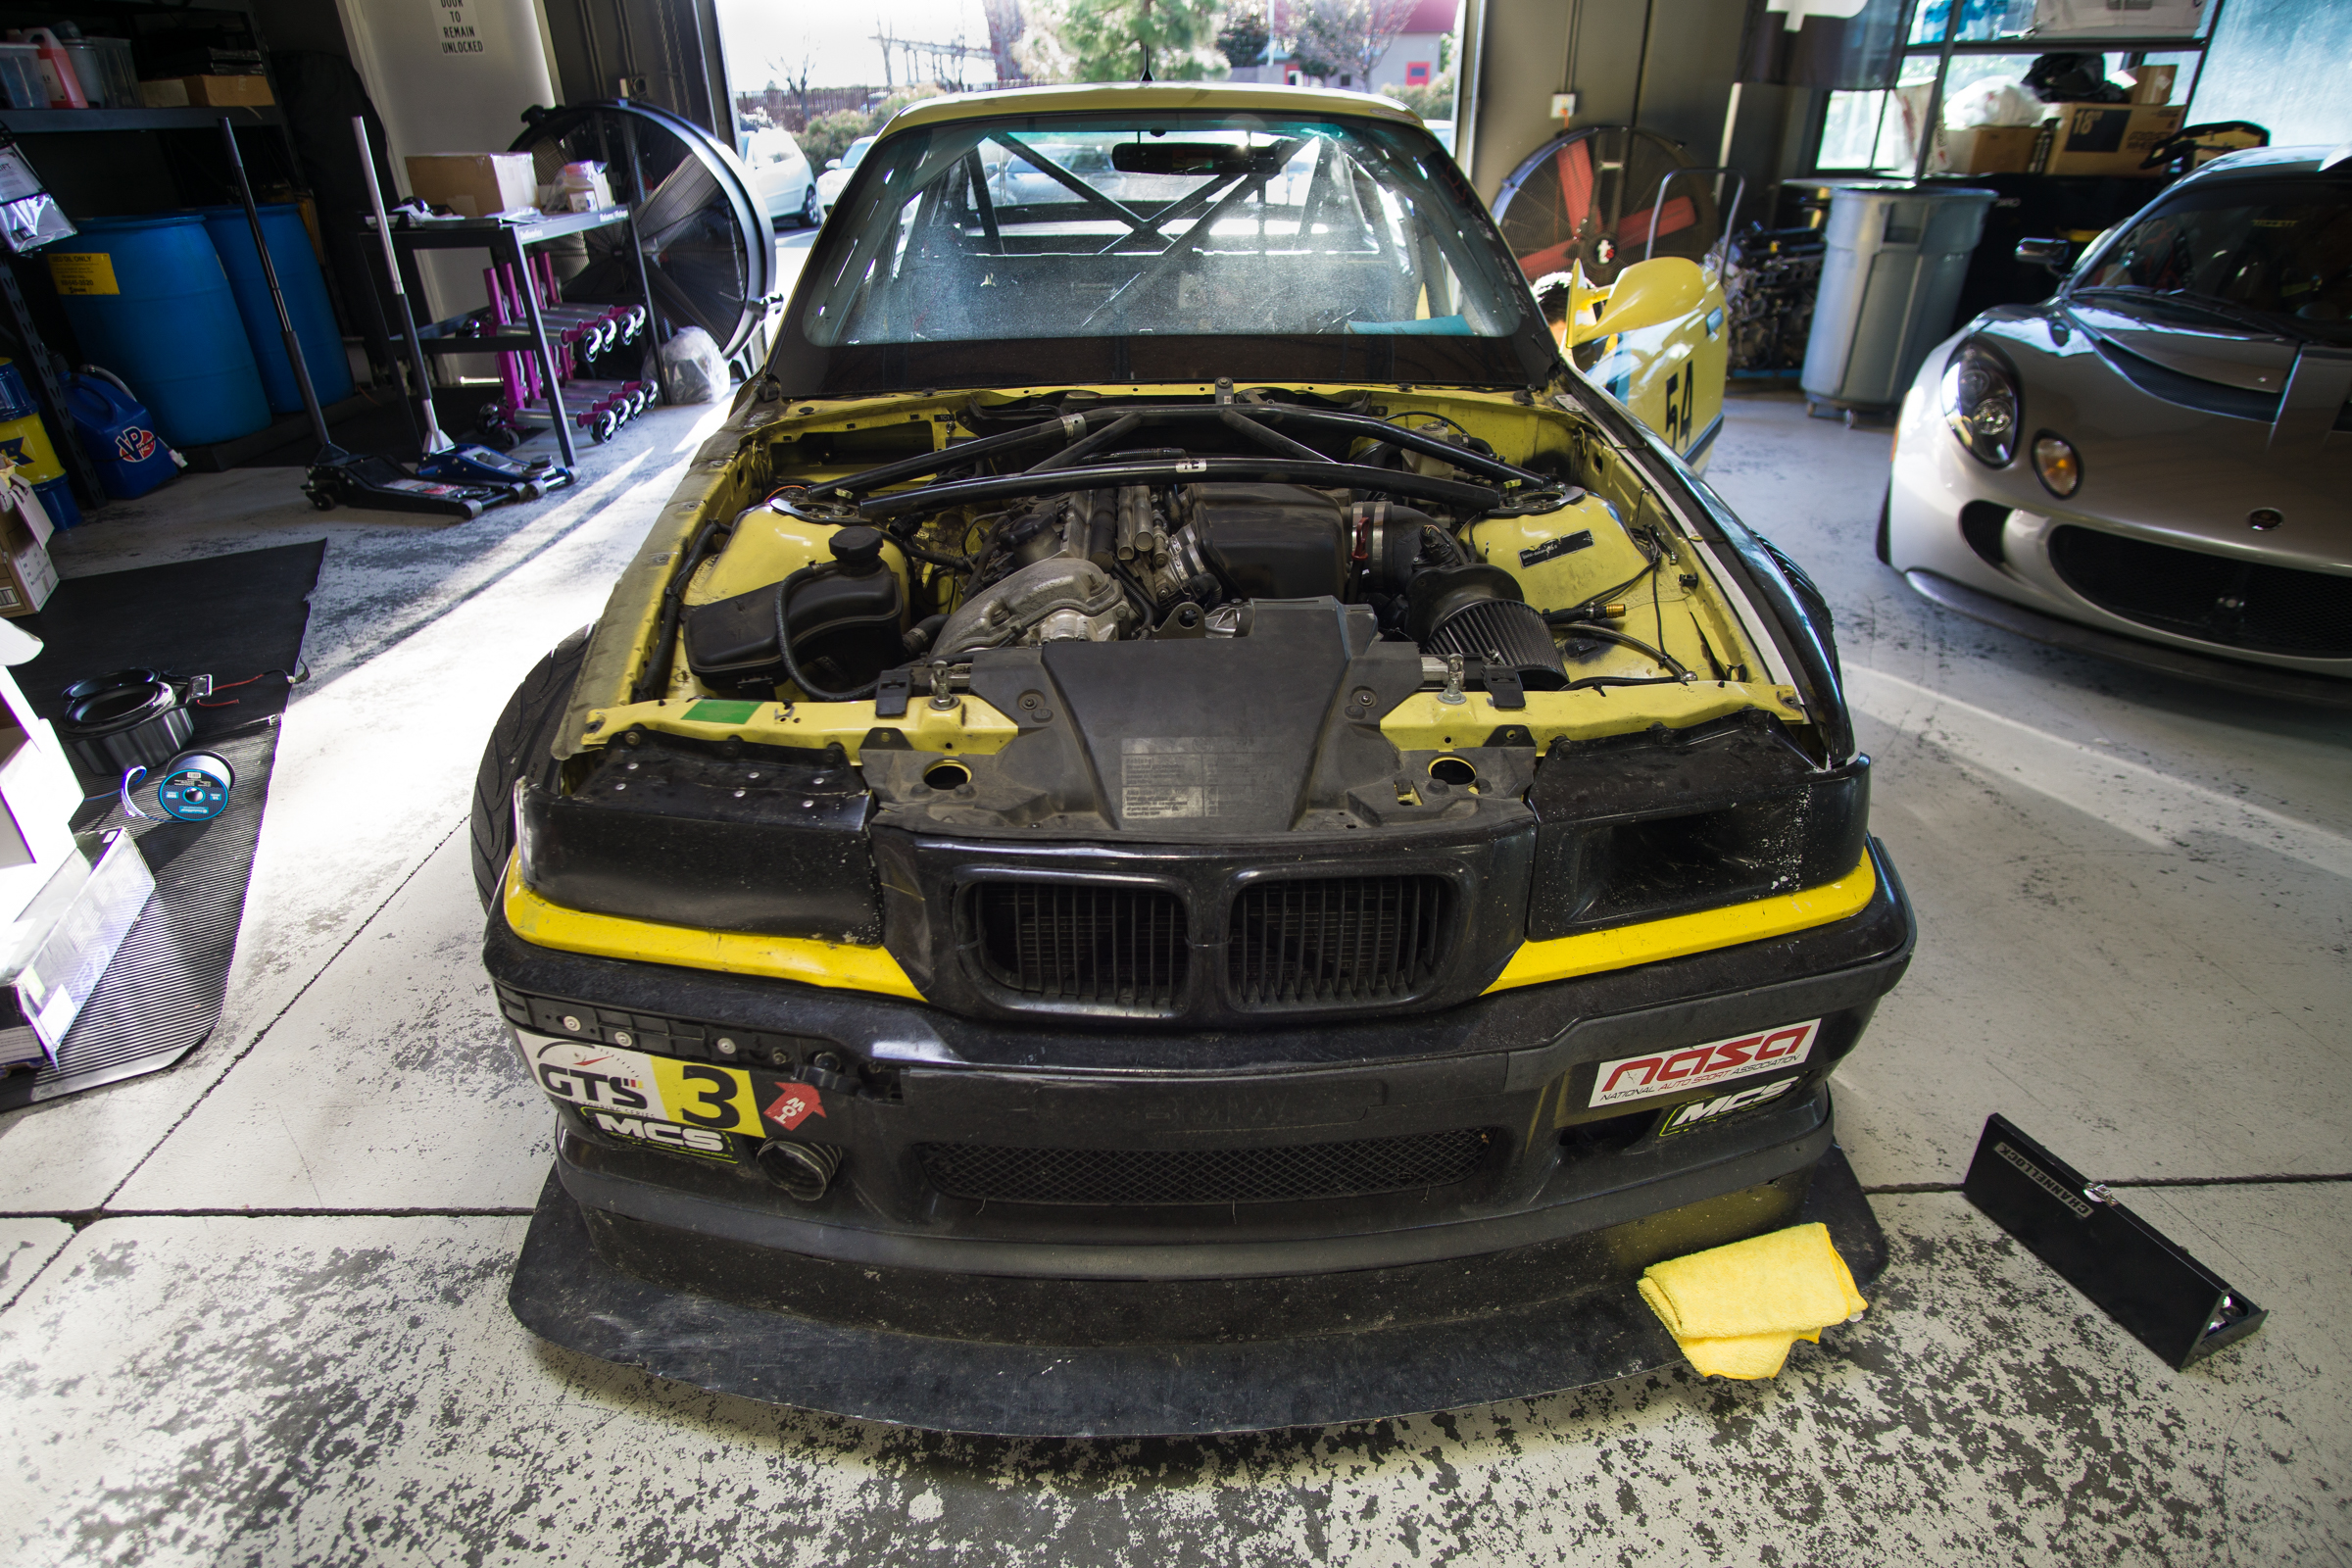 How to Build an E36 Drift Car? – Where to Start and What to Get –